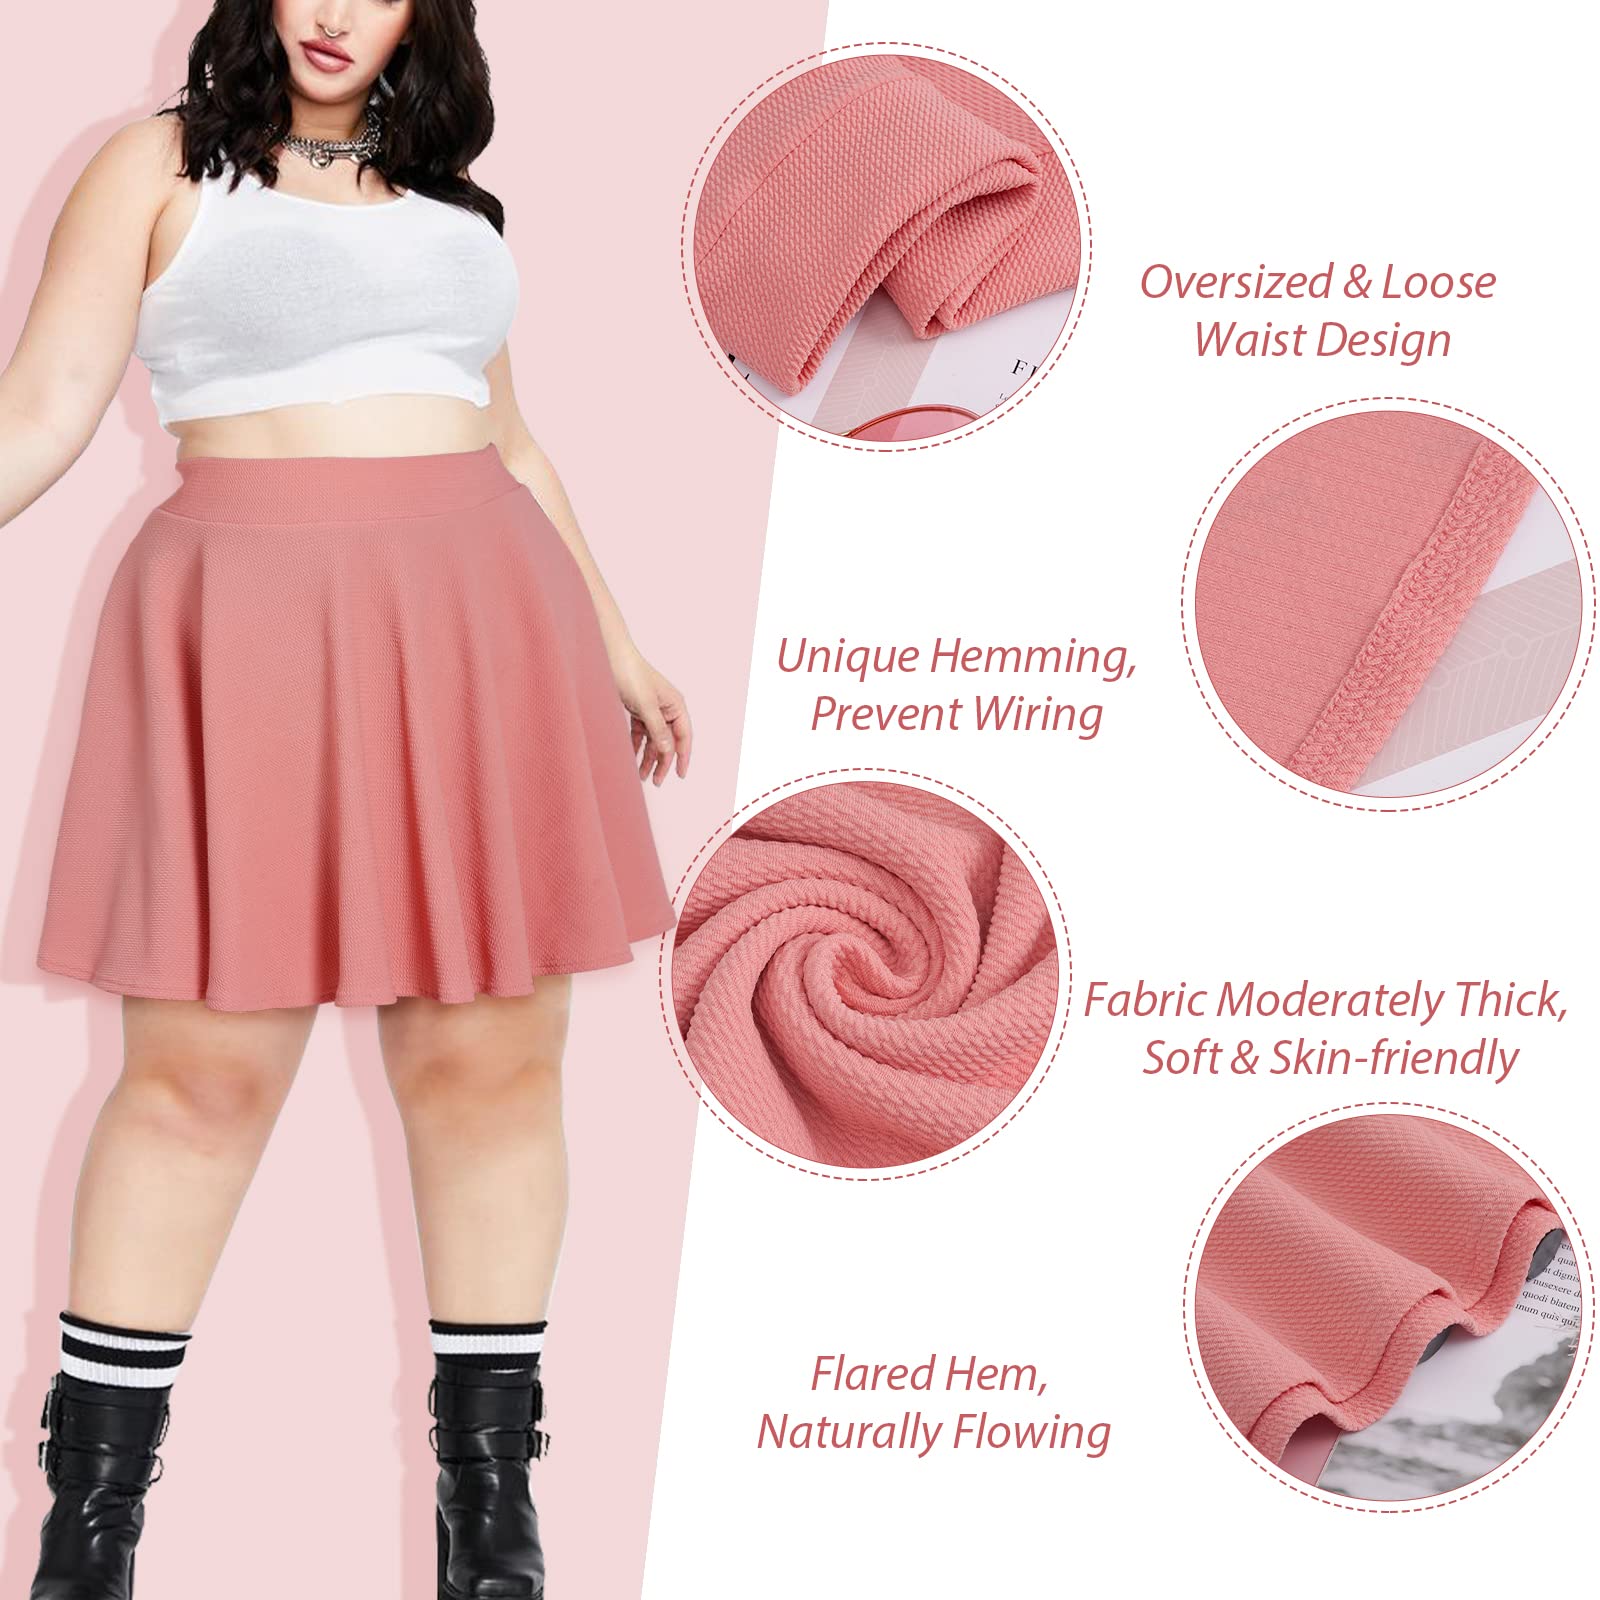 High Waisted Skater Skirt Plus Size-Pink - Moon Wood